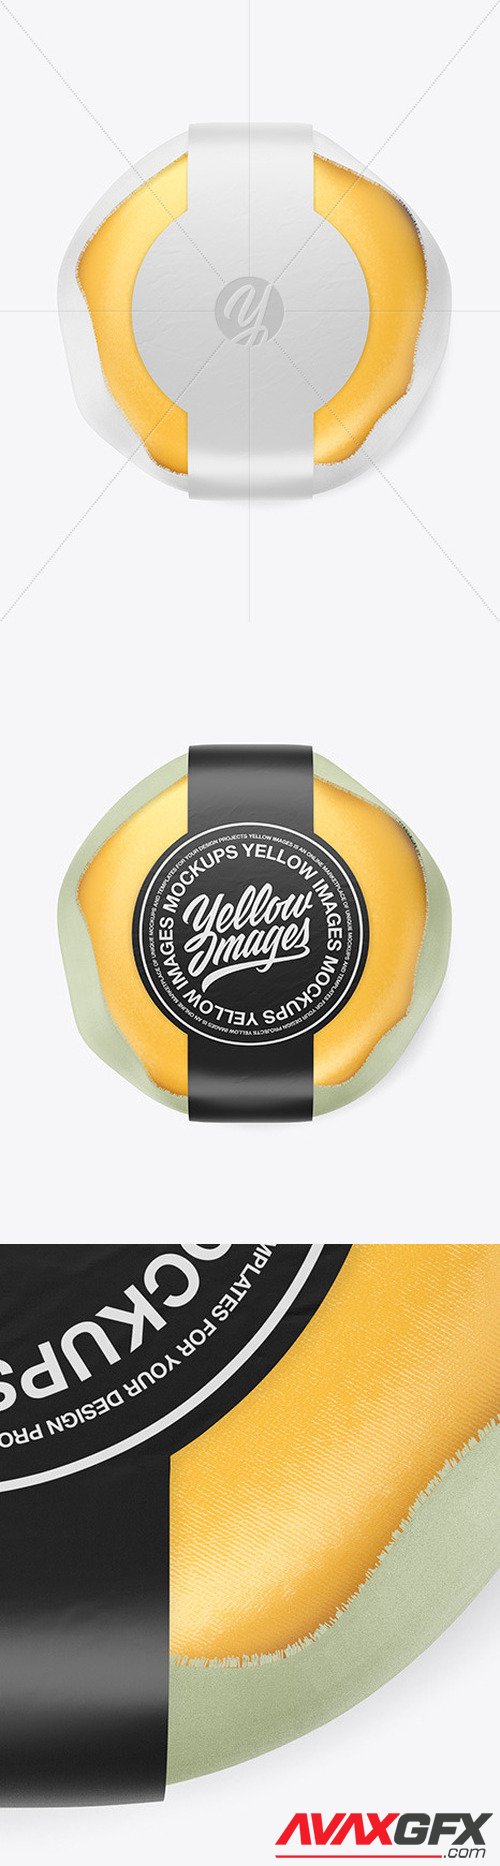 Cheese Wheel with Cover Mockup 56291 [TIF]